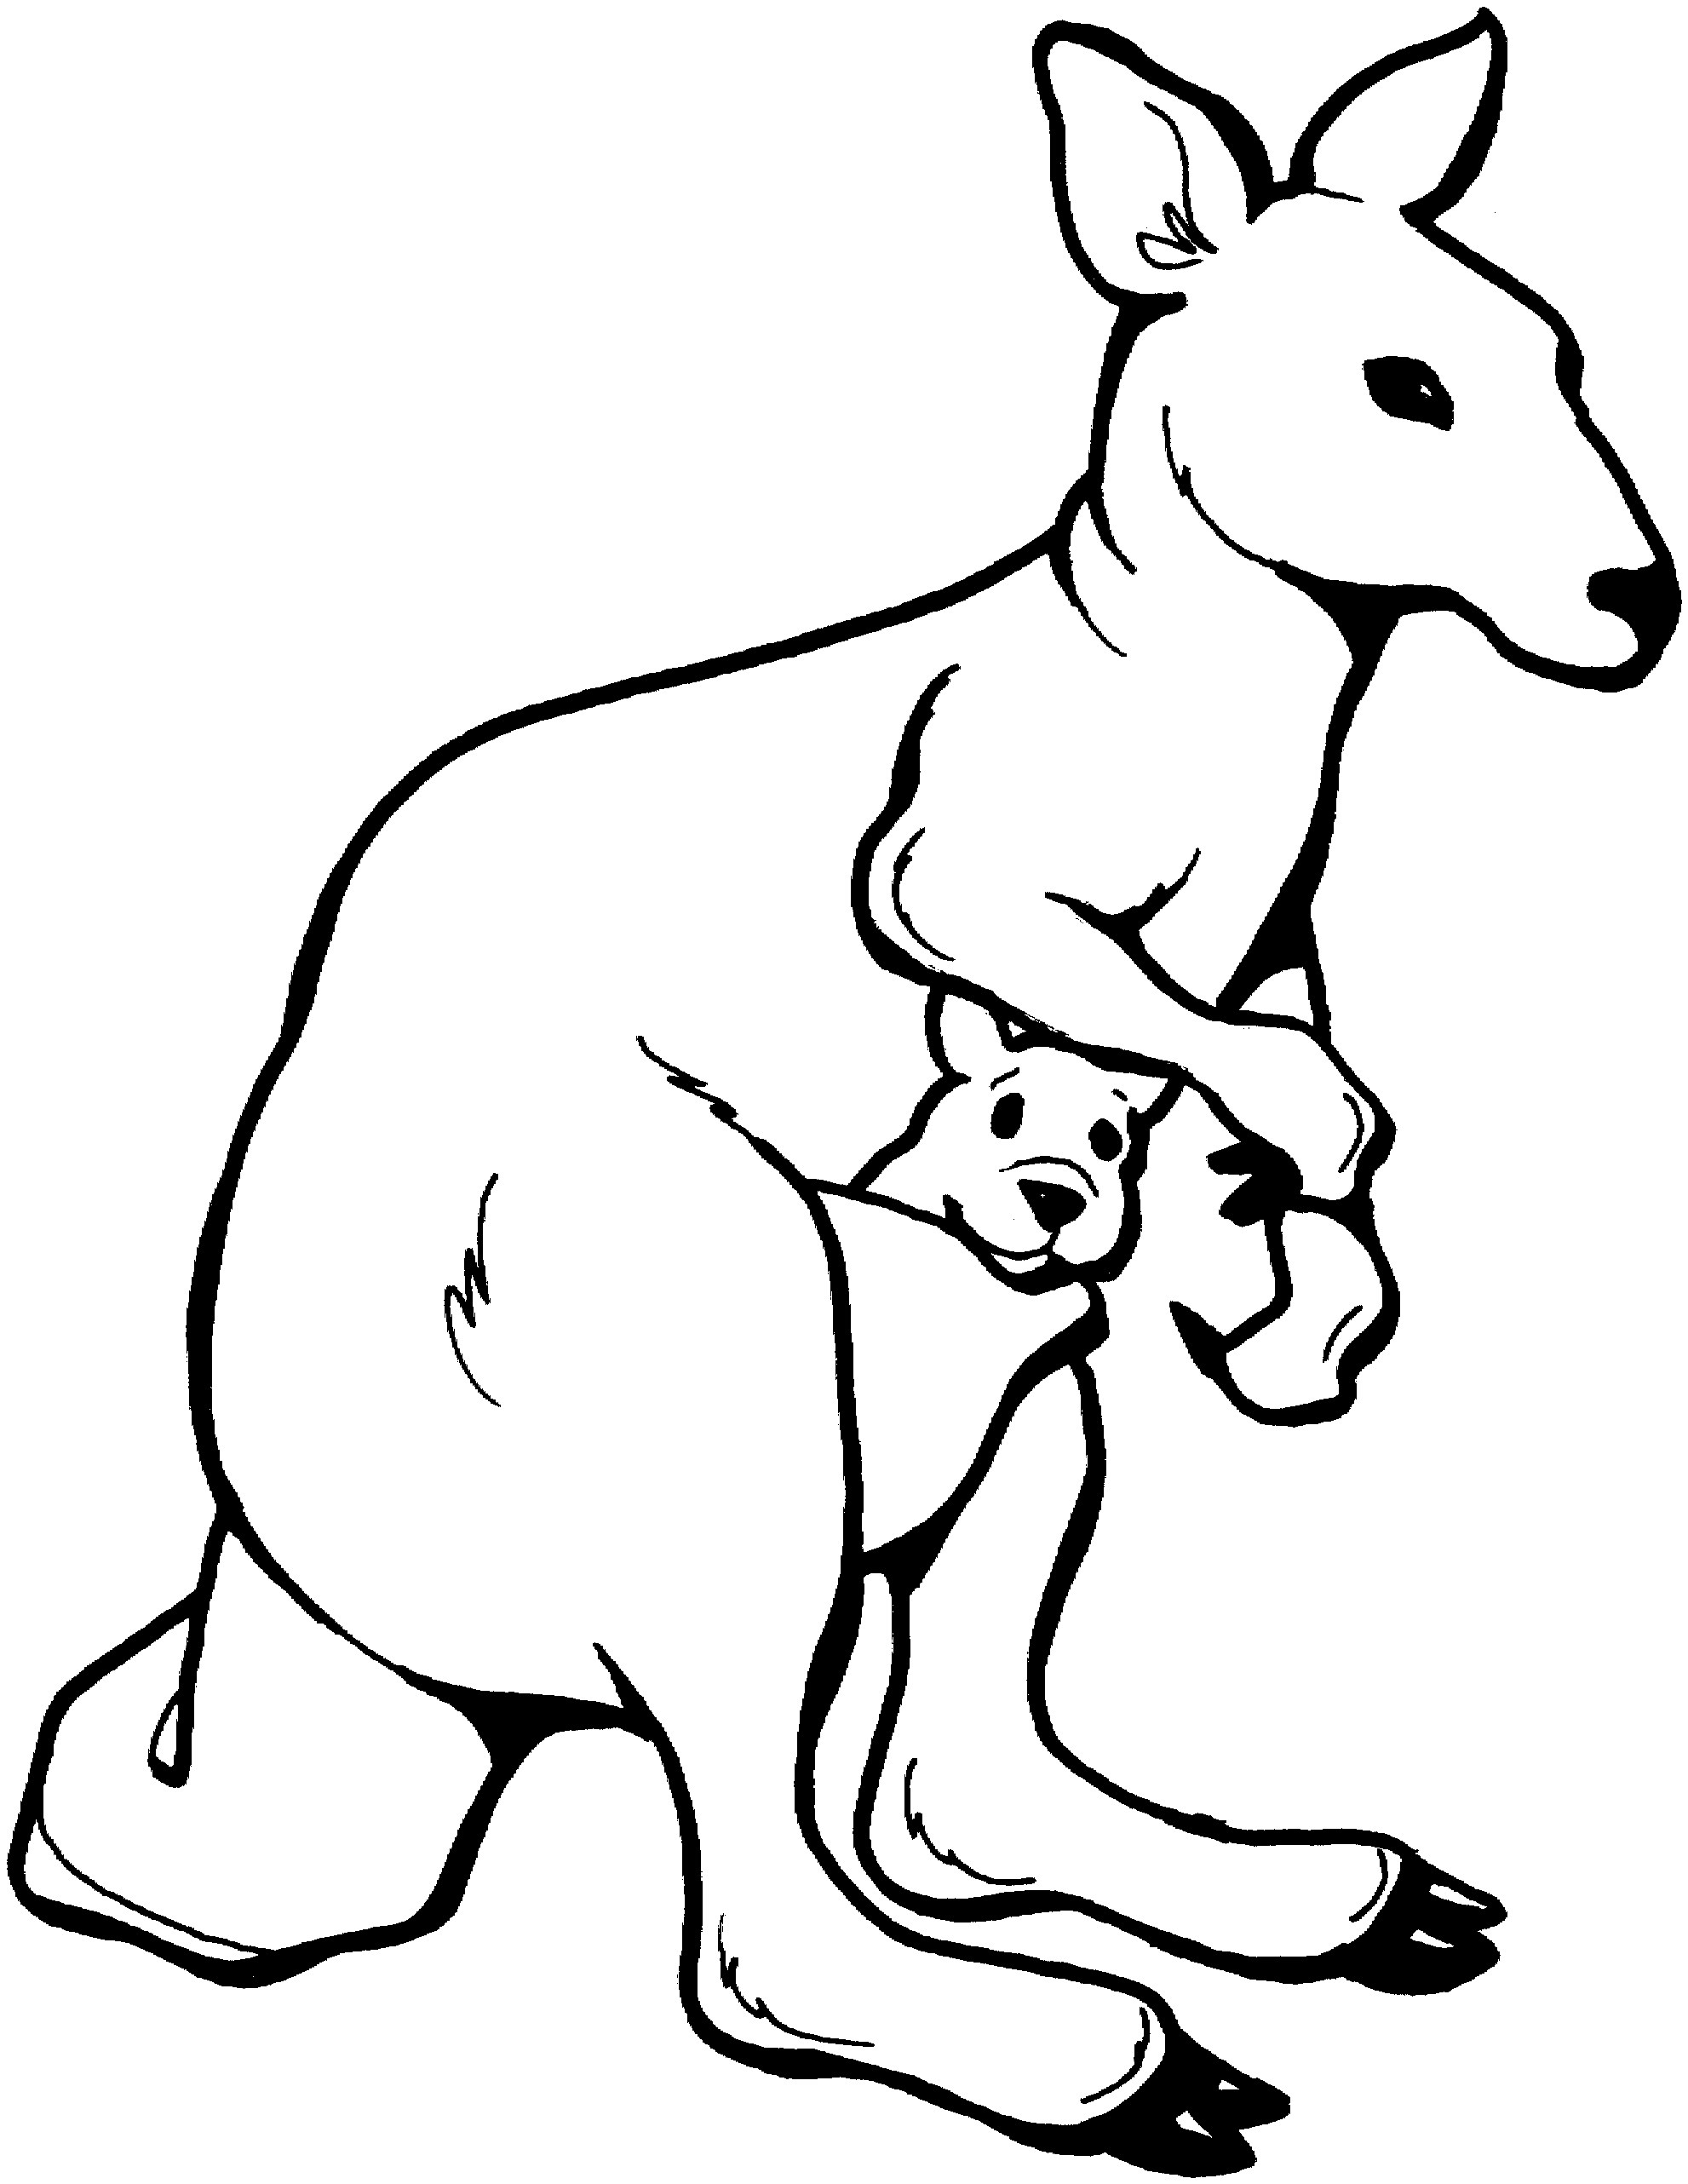 Kangaroo clipart black and white free images 2 wikiclipart